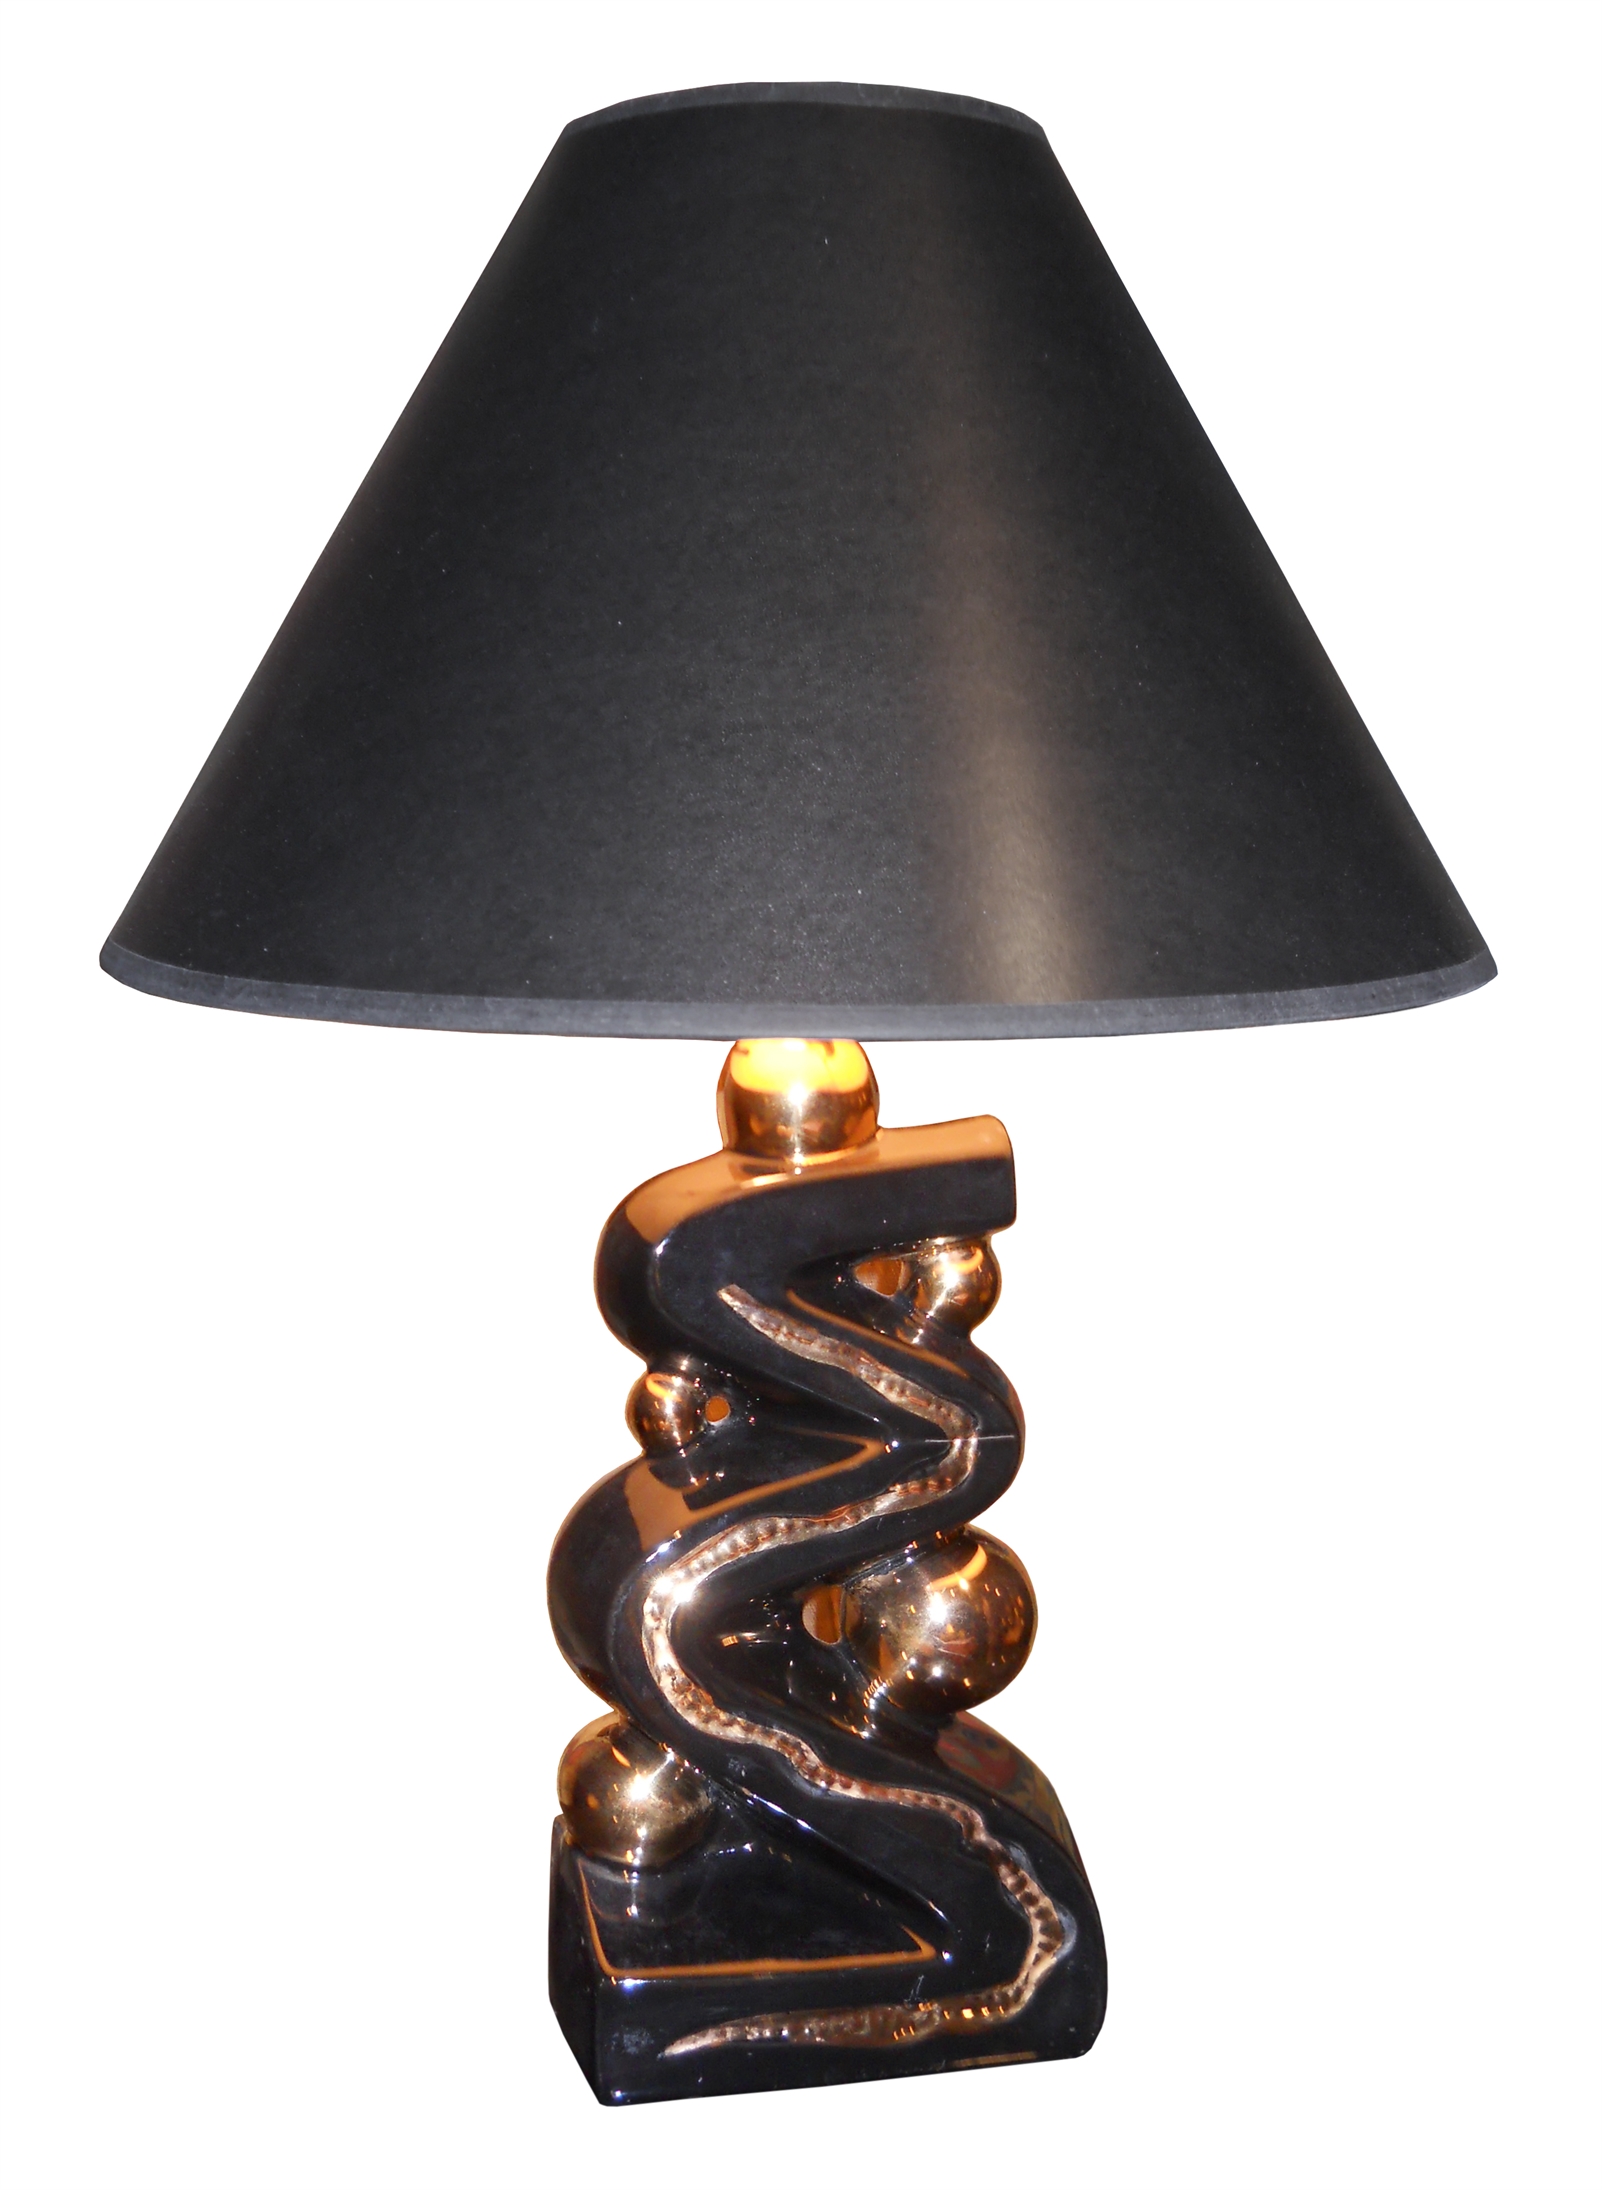 MB/3030 - Pair of Black and Gold Lamps